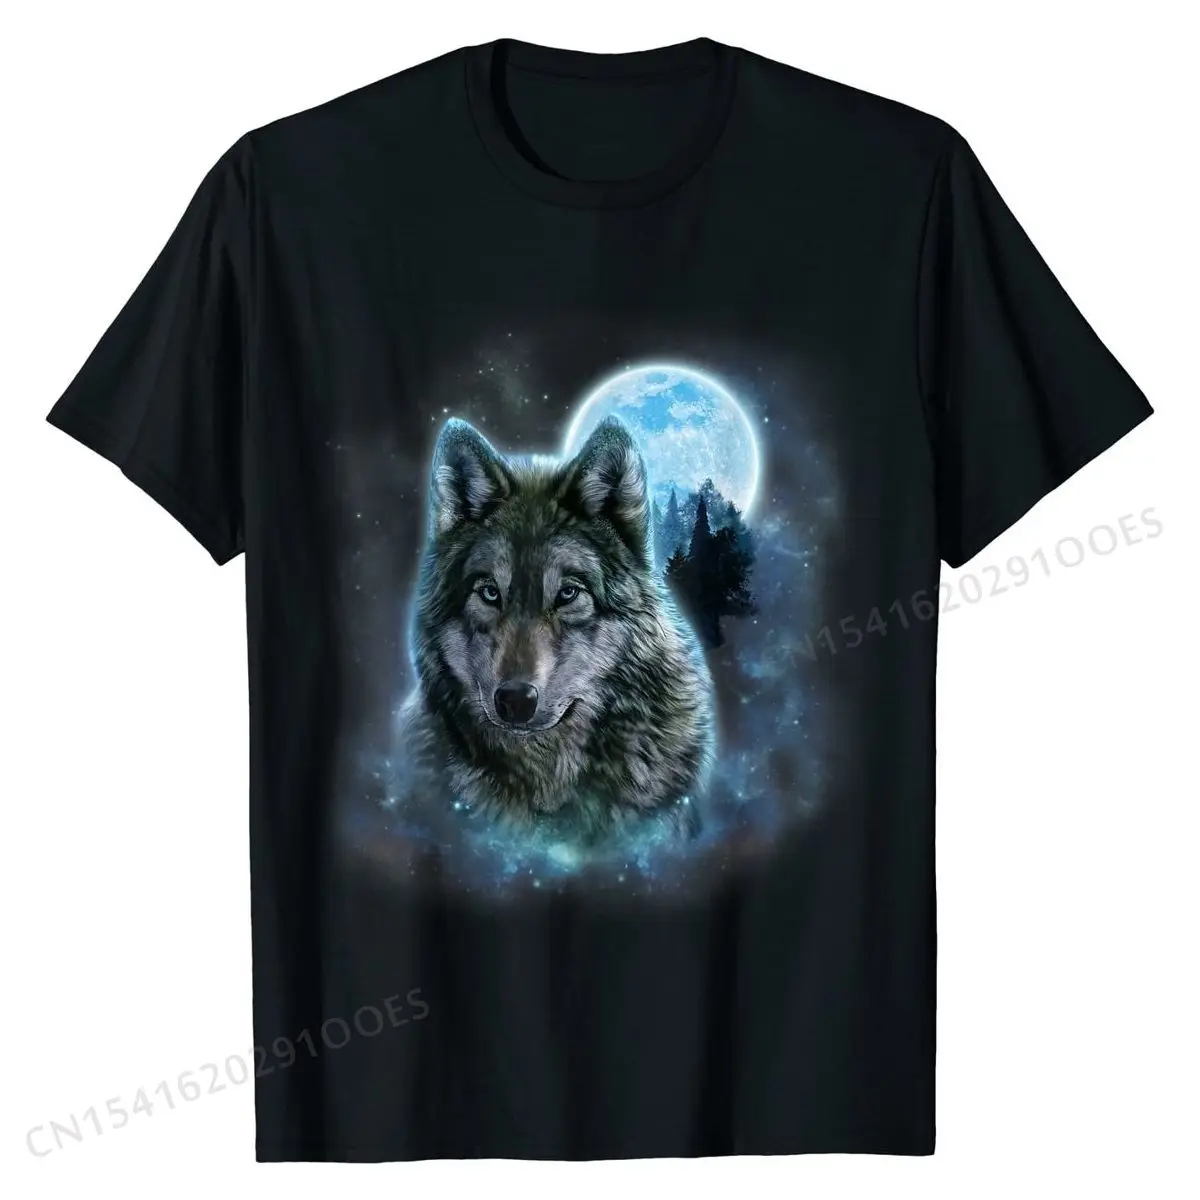 T-Shirt, Grey Wolf  Ground, Icy Moon, Forest, Galaxy T Shirts Dominant Fashionable Cotton Men Tops Shirts Normal